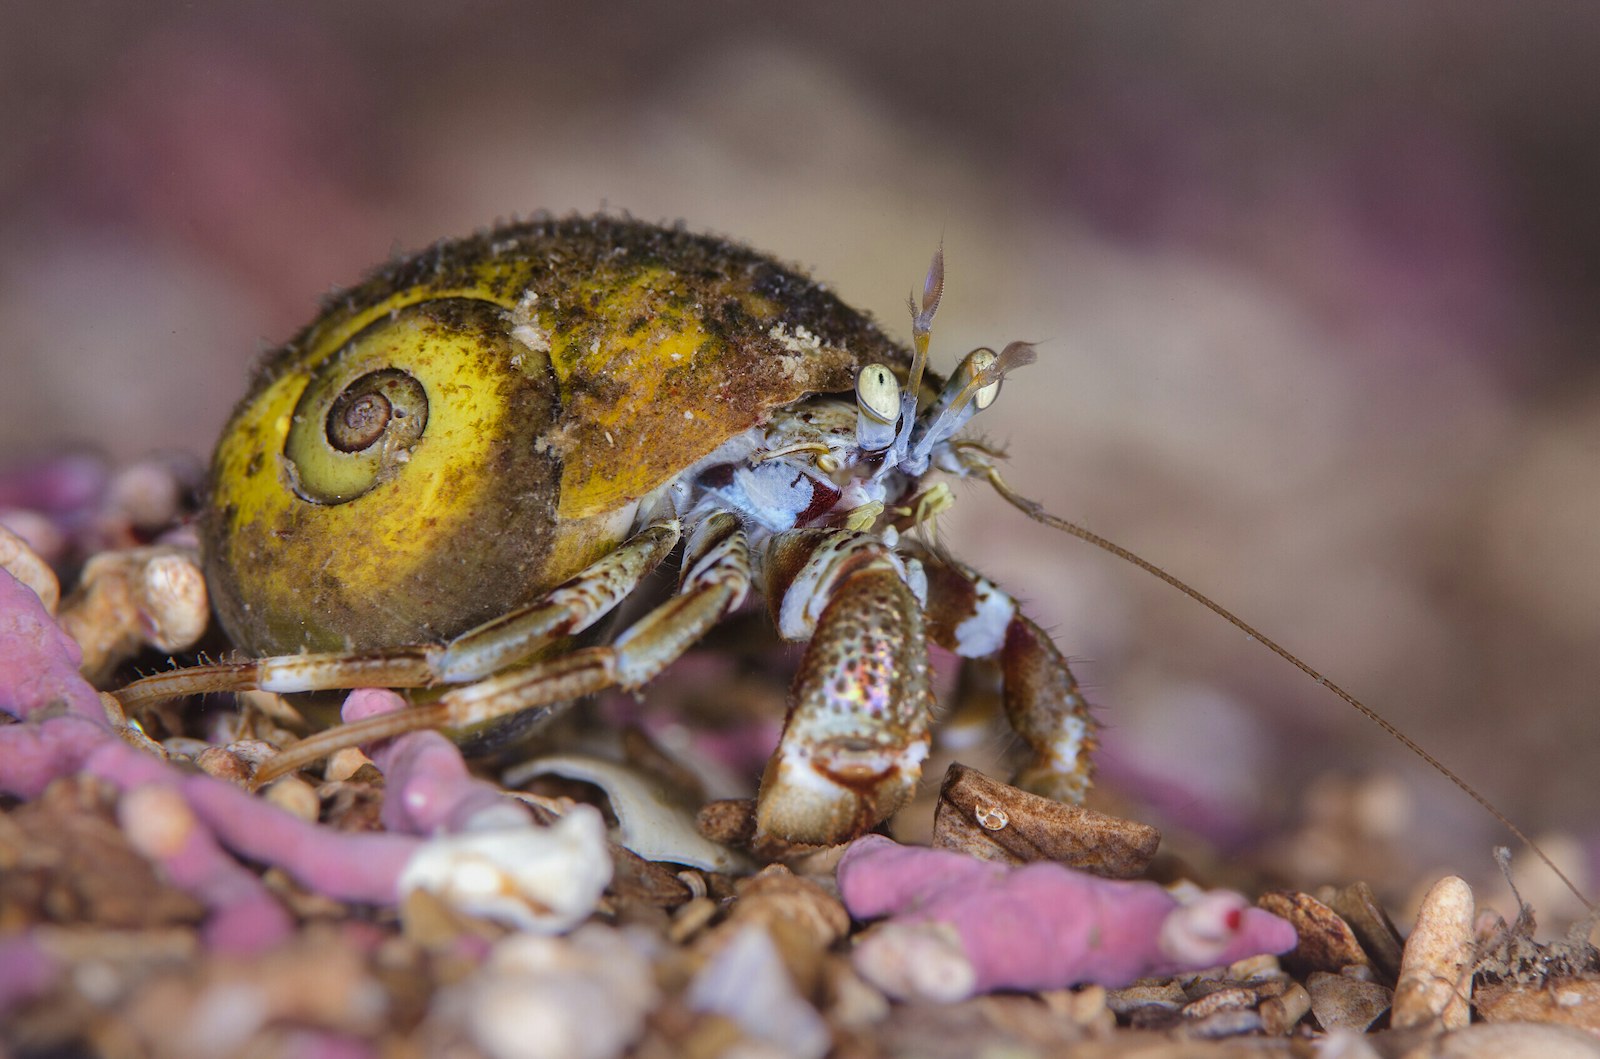 Common hermit crab in a bed of maerl, a pink coraline algae. Loch Carron, Ross and Comarty, Scotland. British Isles. North East Atlantic Ocean